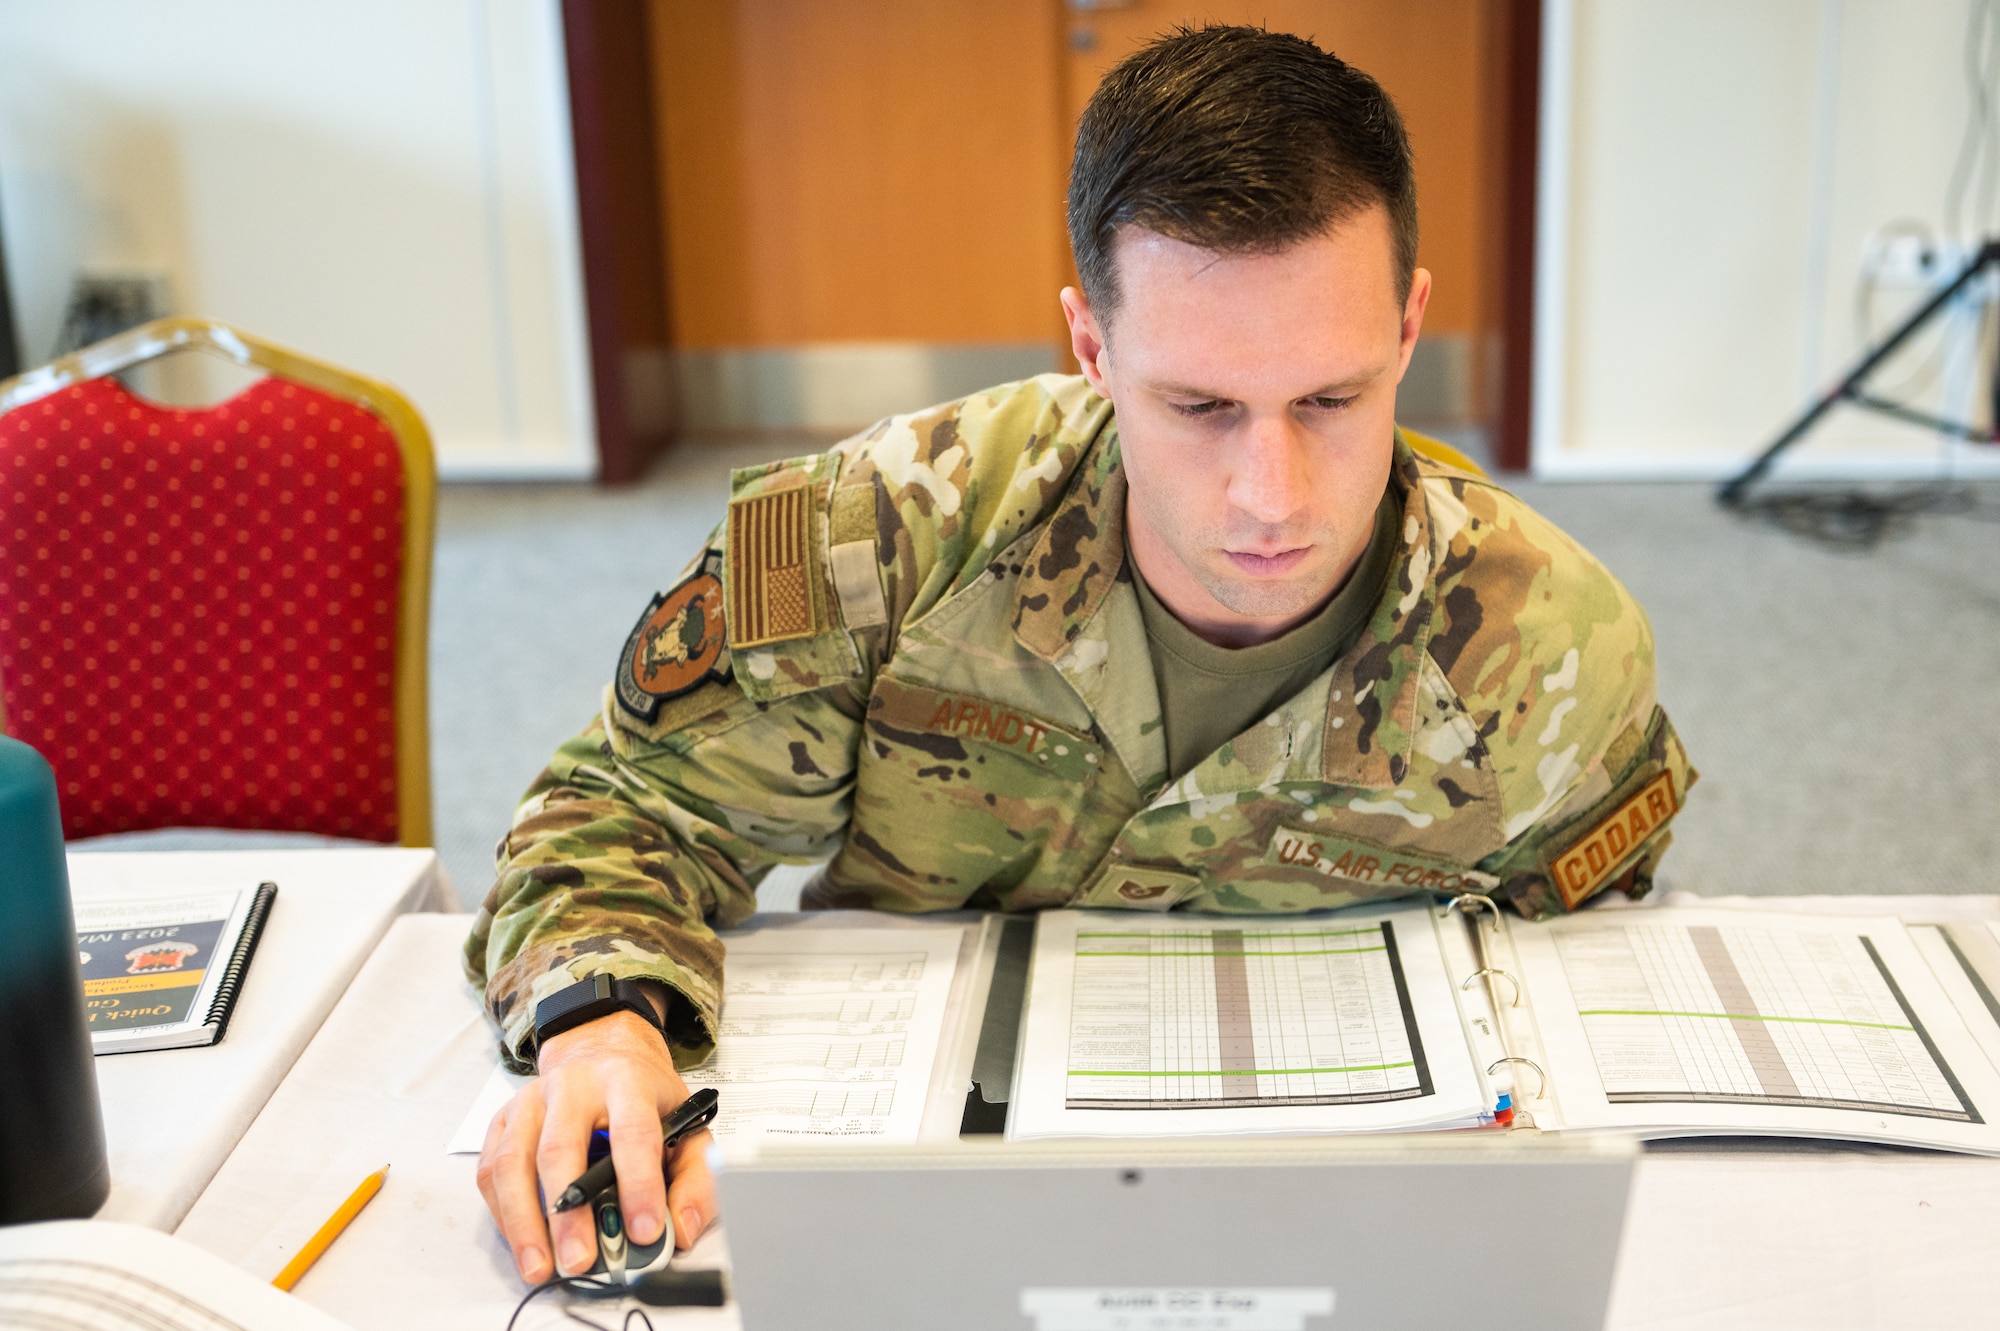 Airman stares intensely at his computer screen